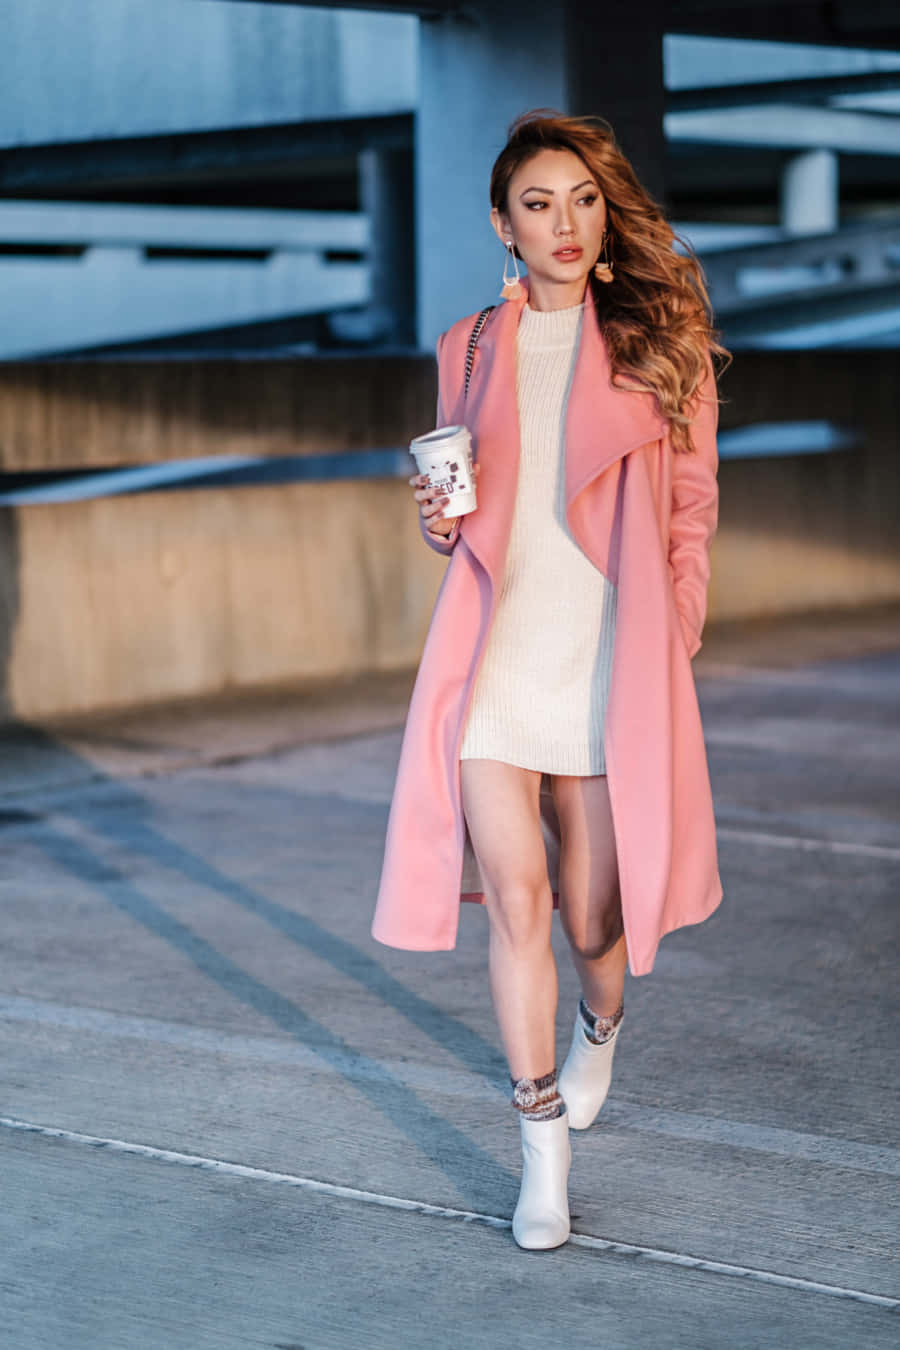 Stylish female in pink coat strolling outdoors Wallpaper